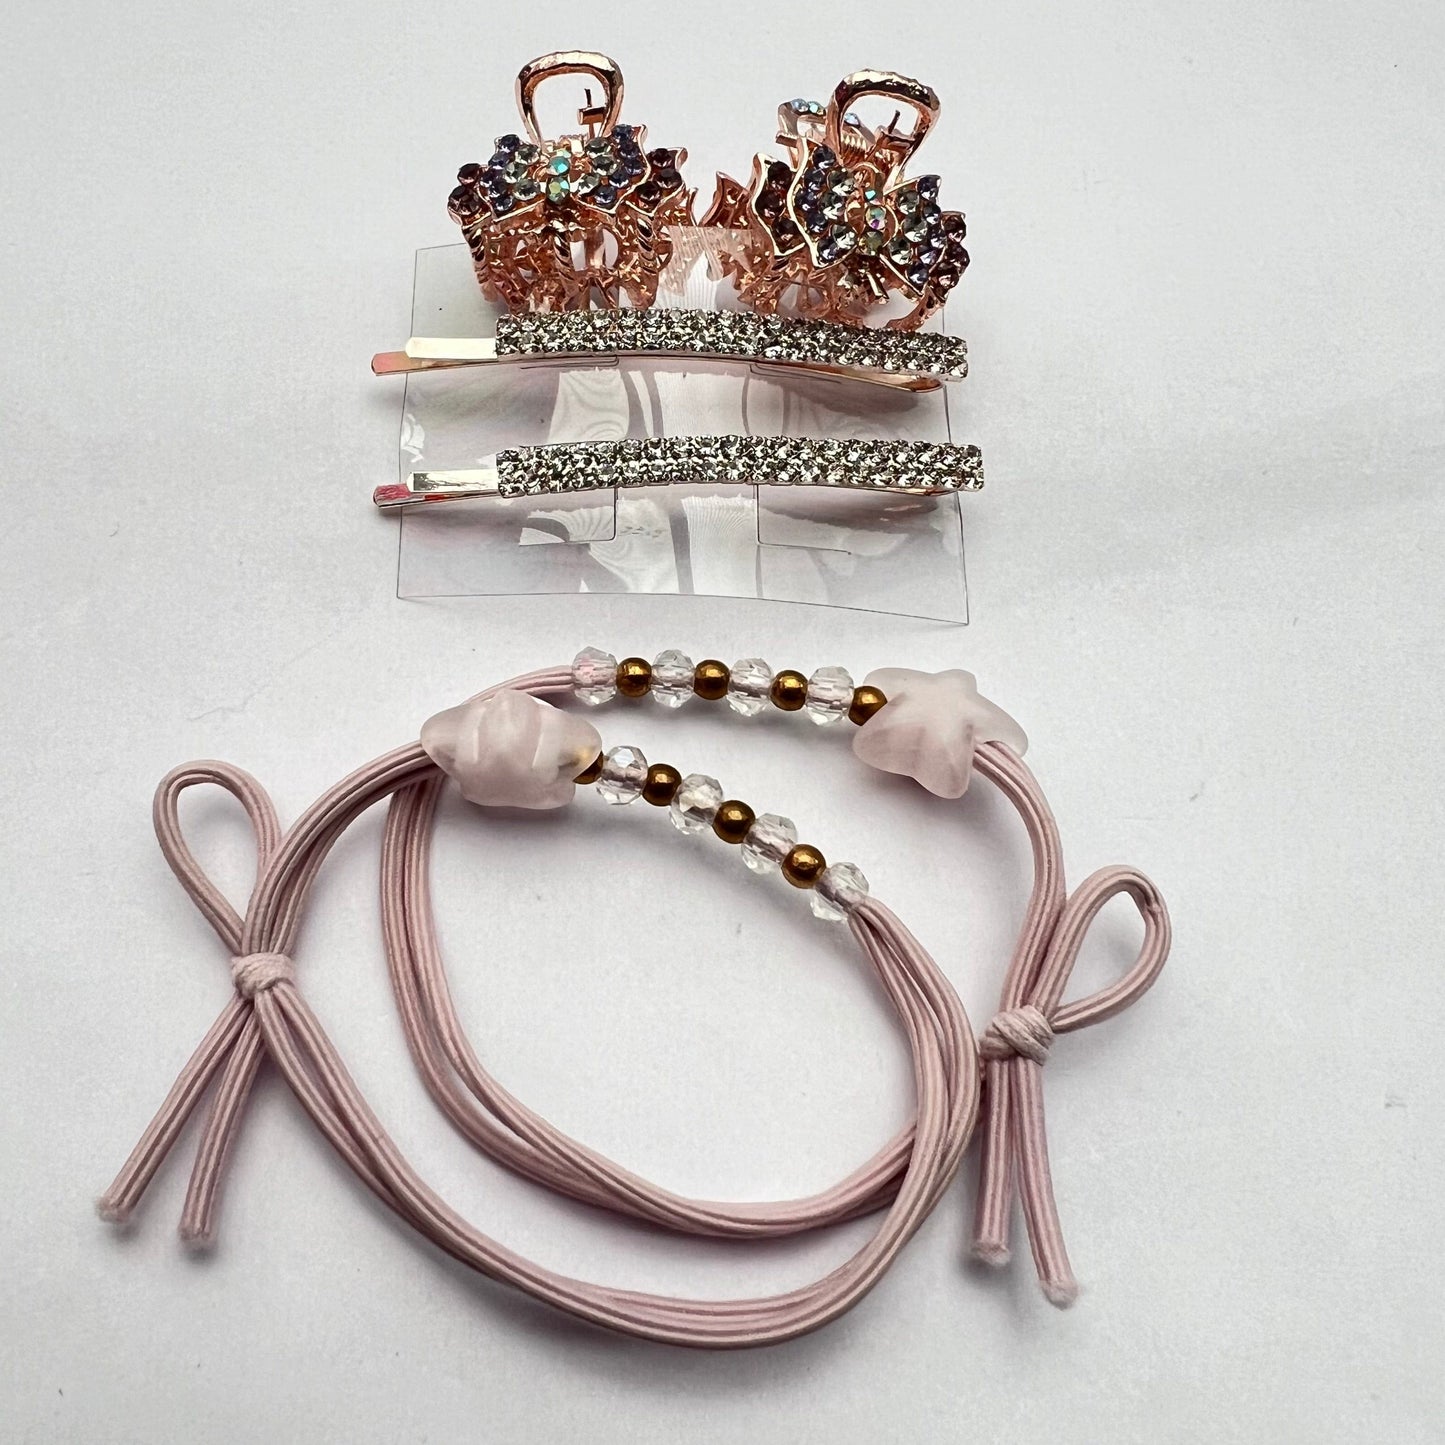 Set of Hair Accessories Hairbands Small Crystals Hair Claw Hair Clip